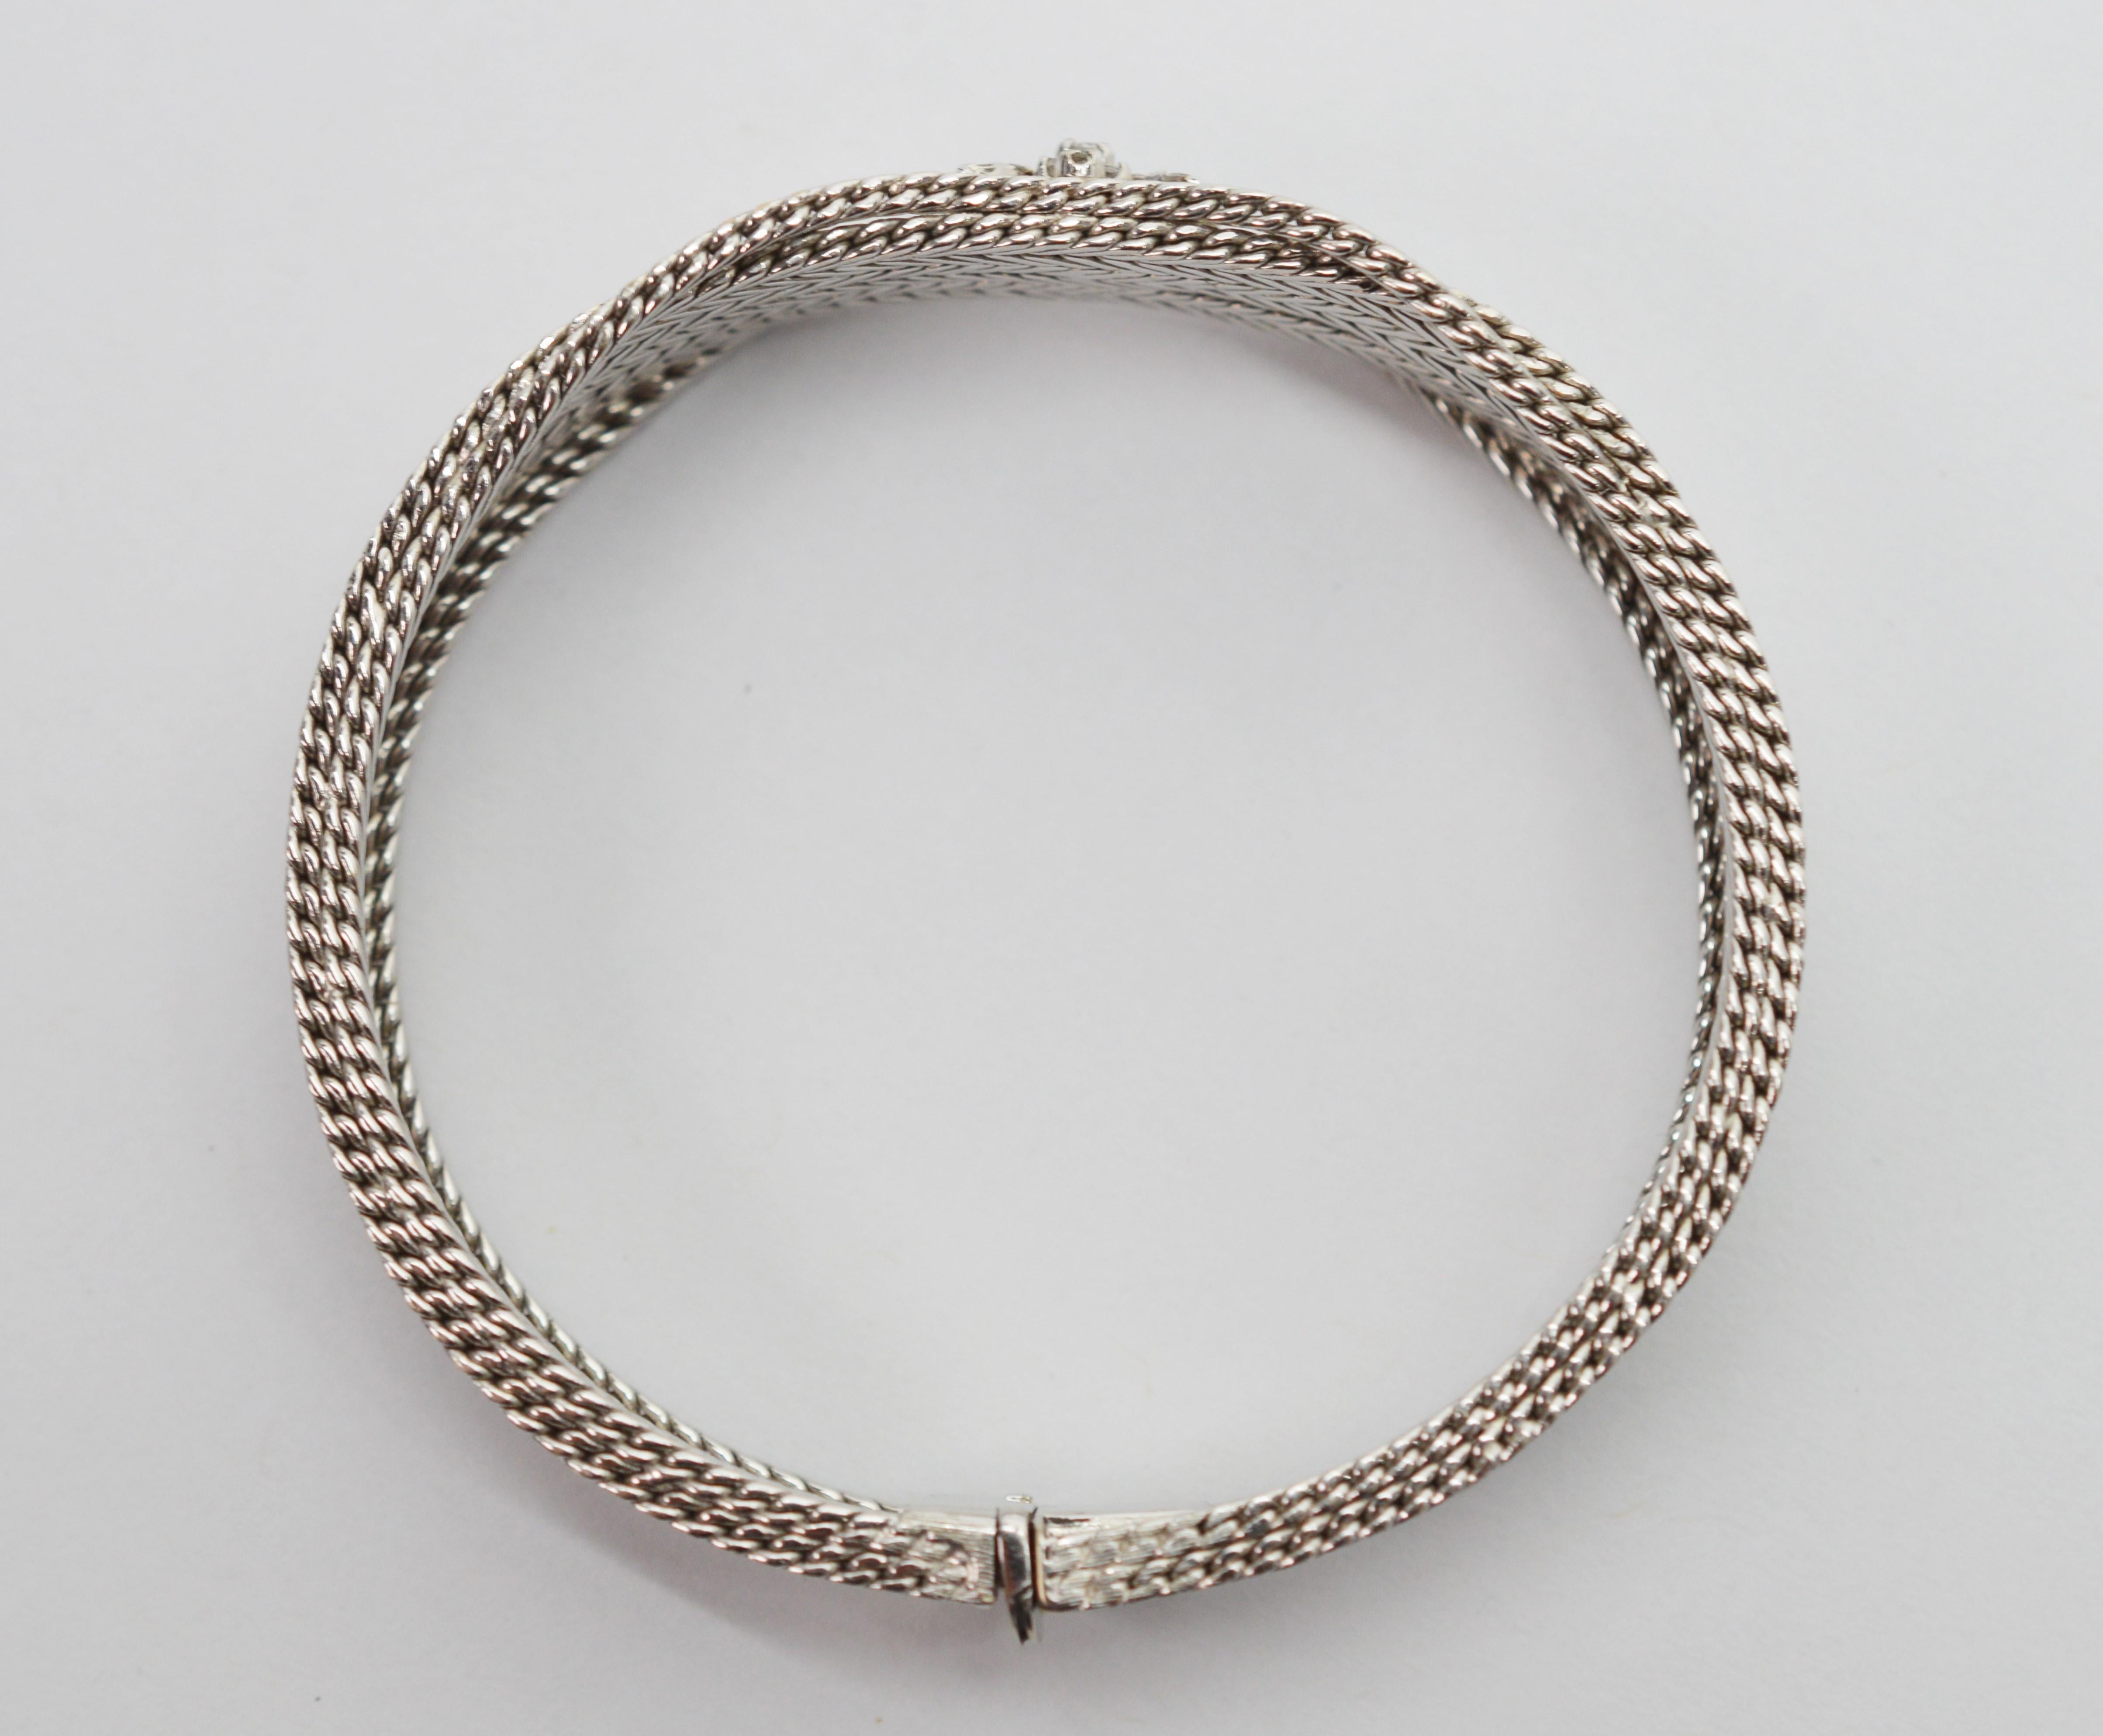 Floral Diamond White Gold Herringbone Bracelet In Excellent Condition For Sale In Mount Kisco, NY